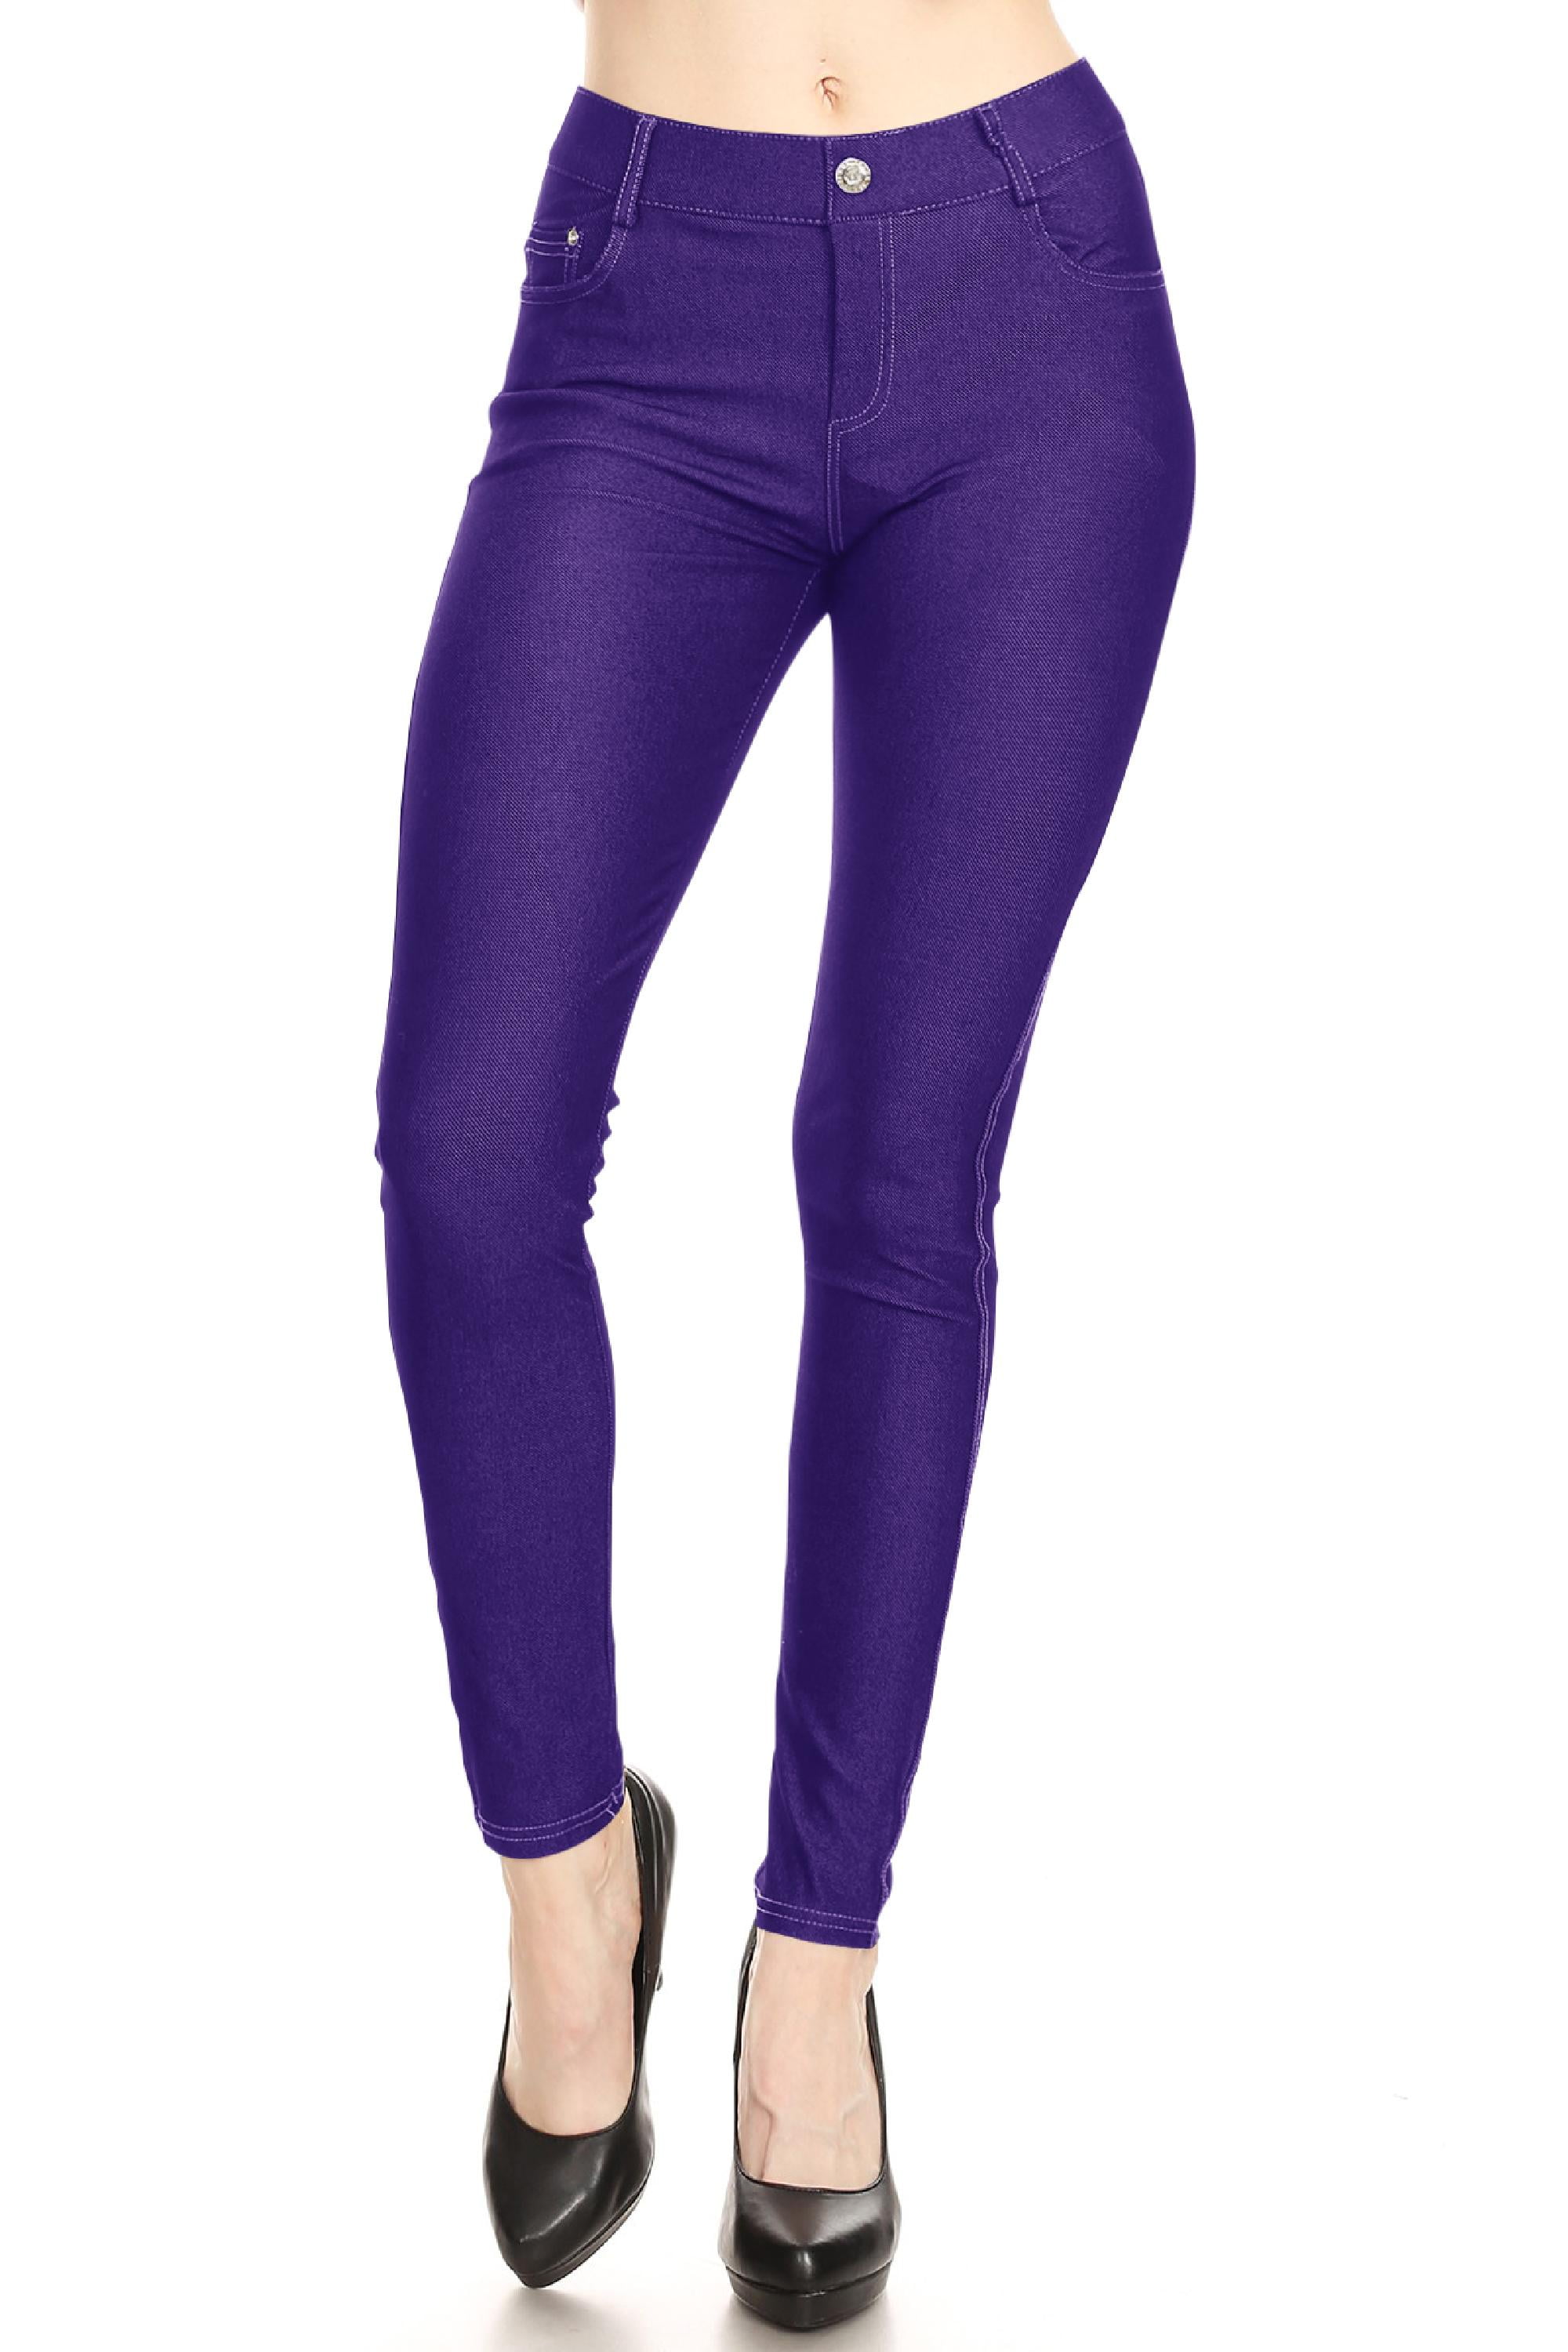 Moa Collection Women's Stretch Jeggings with Pockets Slimming Pull on Jean  Jeggings Long Pant 